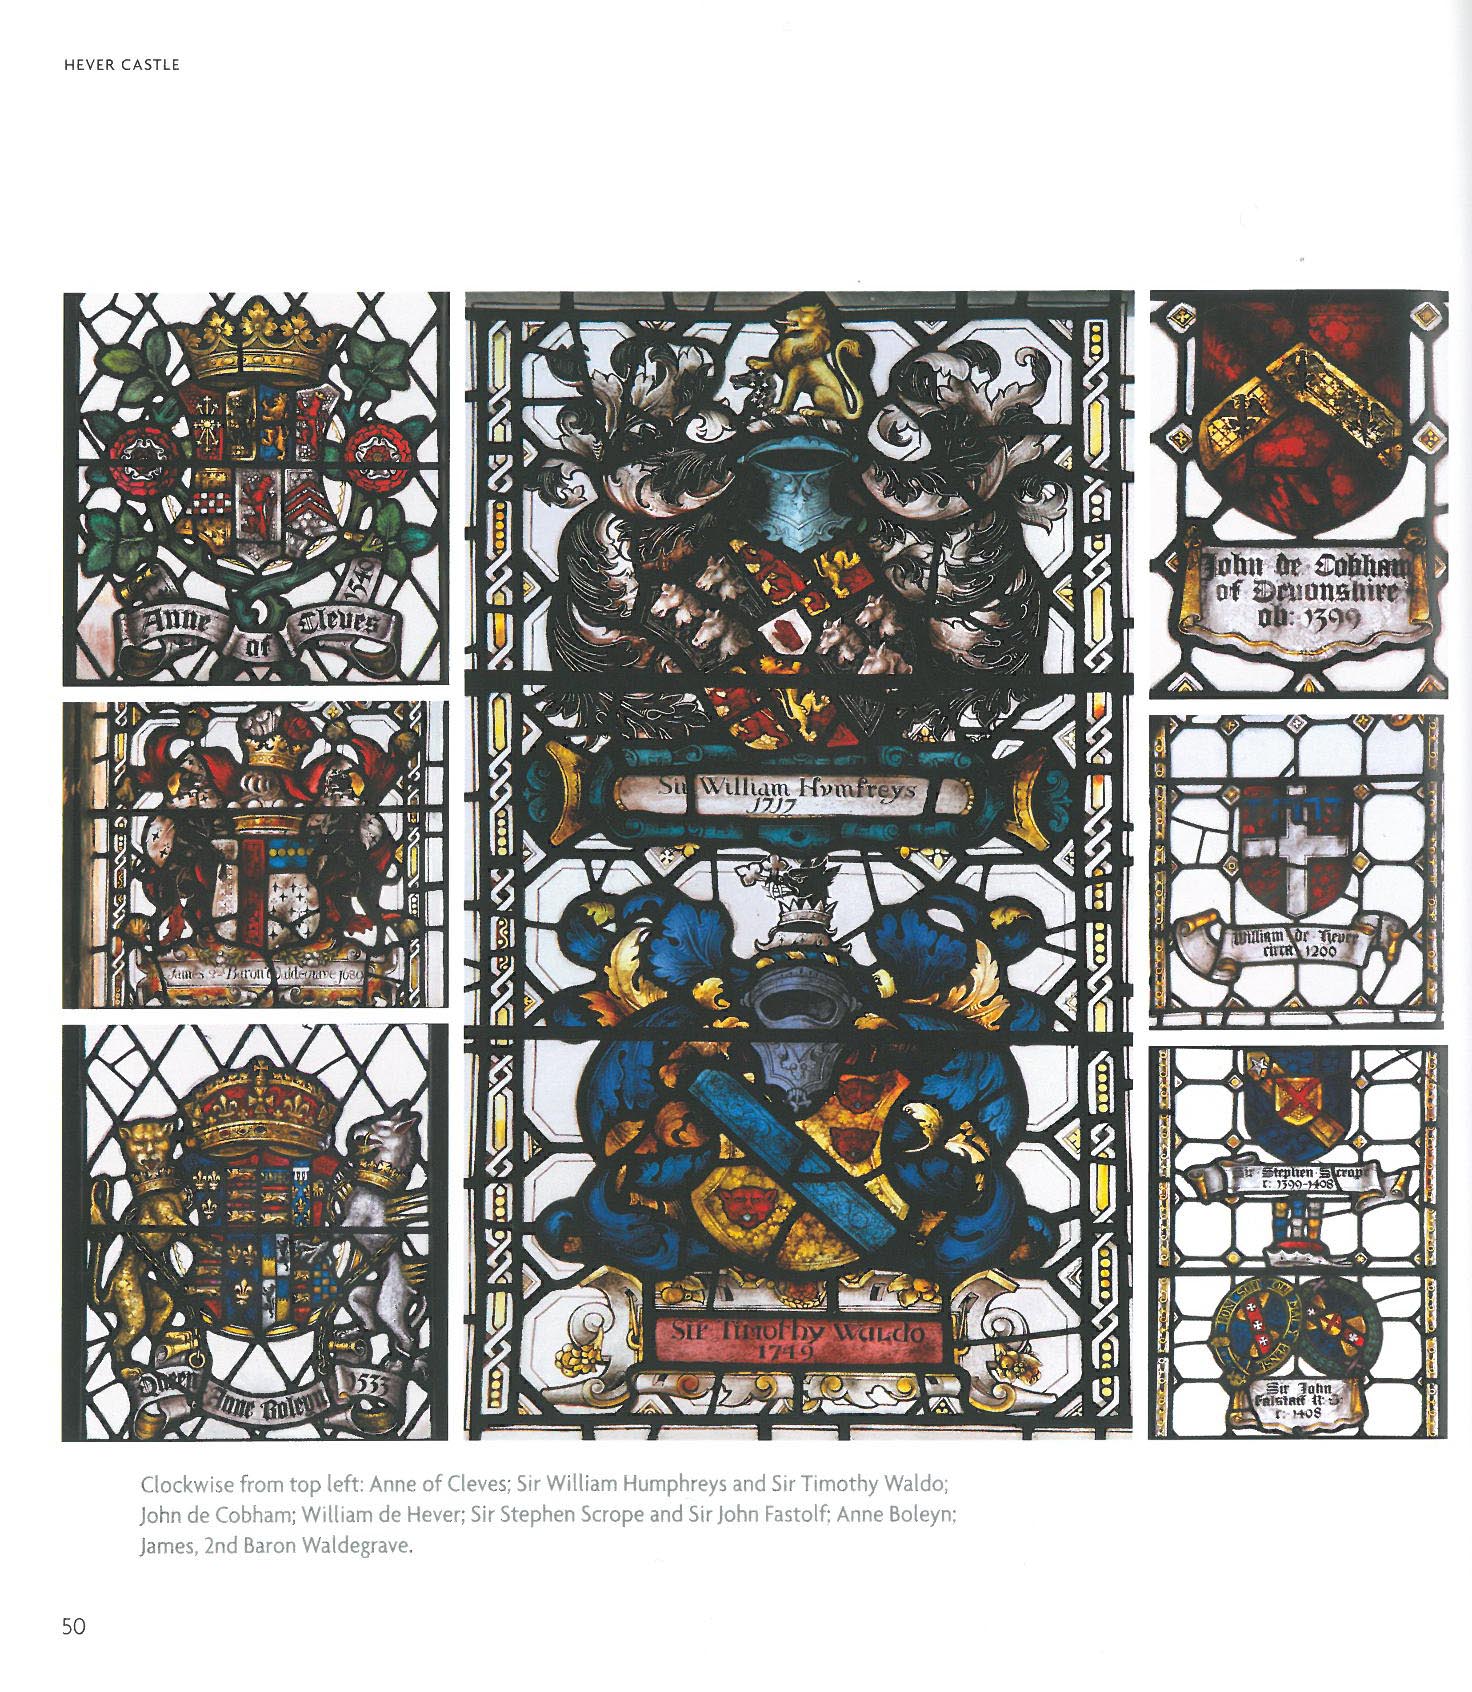 Stained Glass Windows in the Long Gallery. These commemorate the different owners of Hever Castle. Image courtesy of Hever Castle.